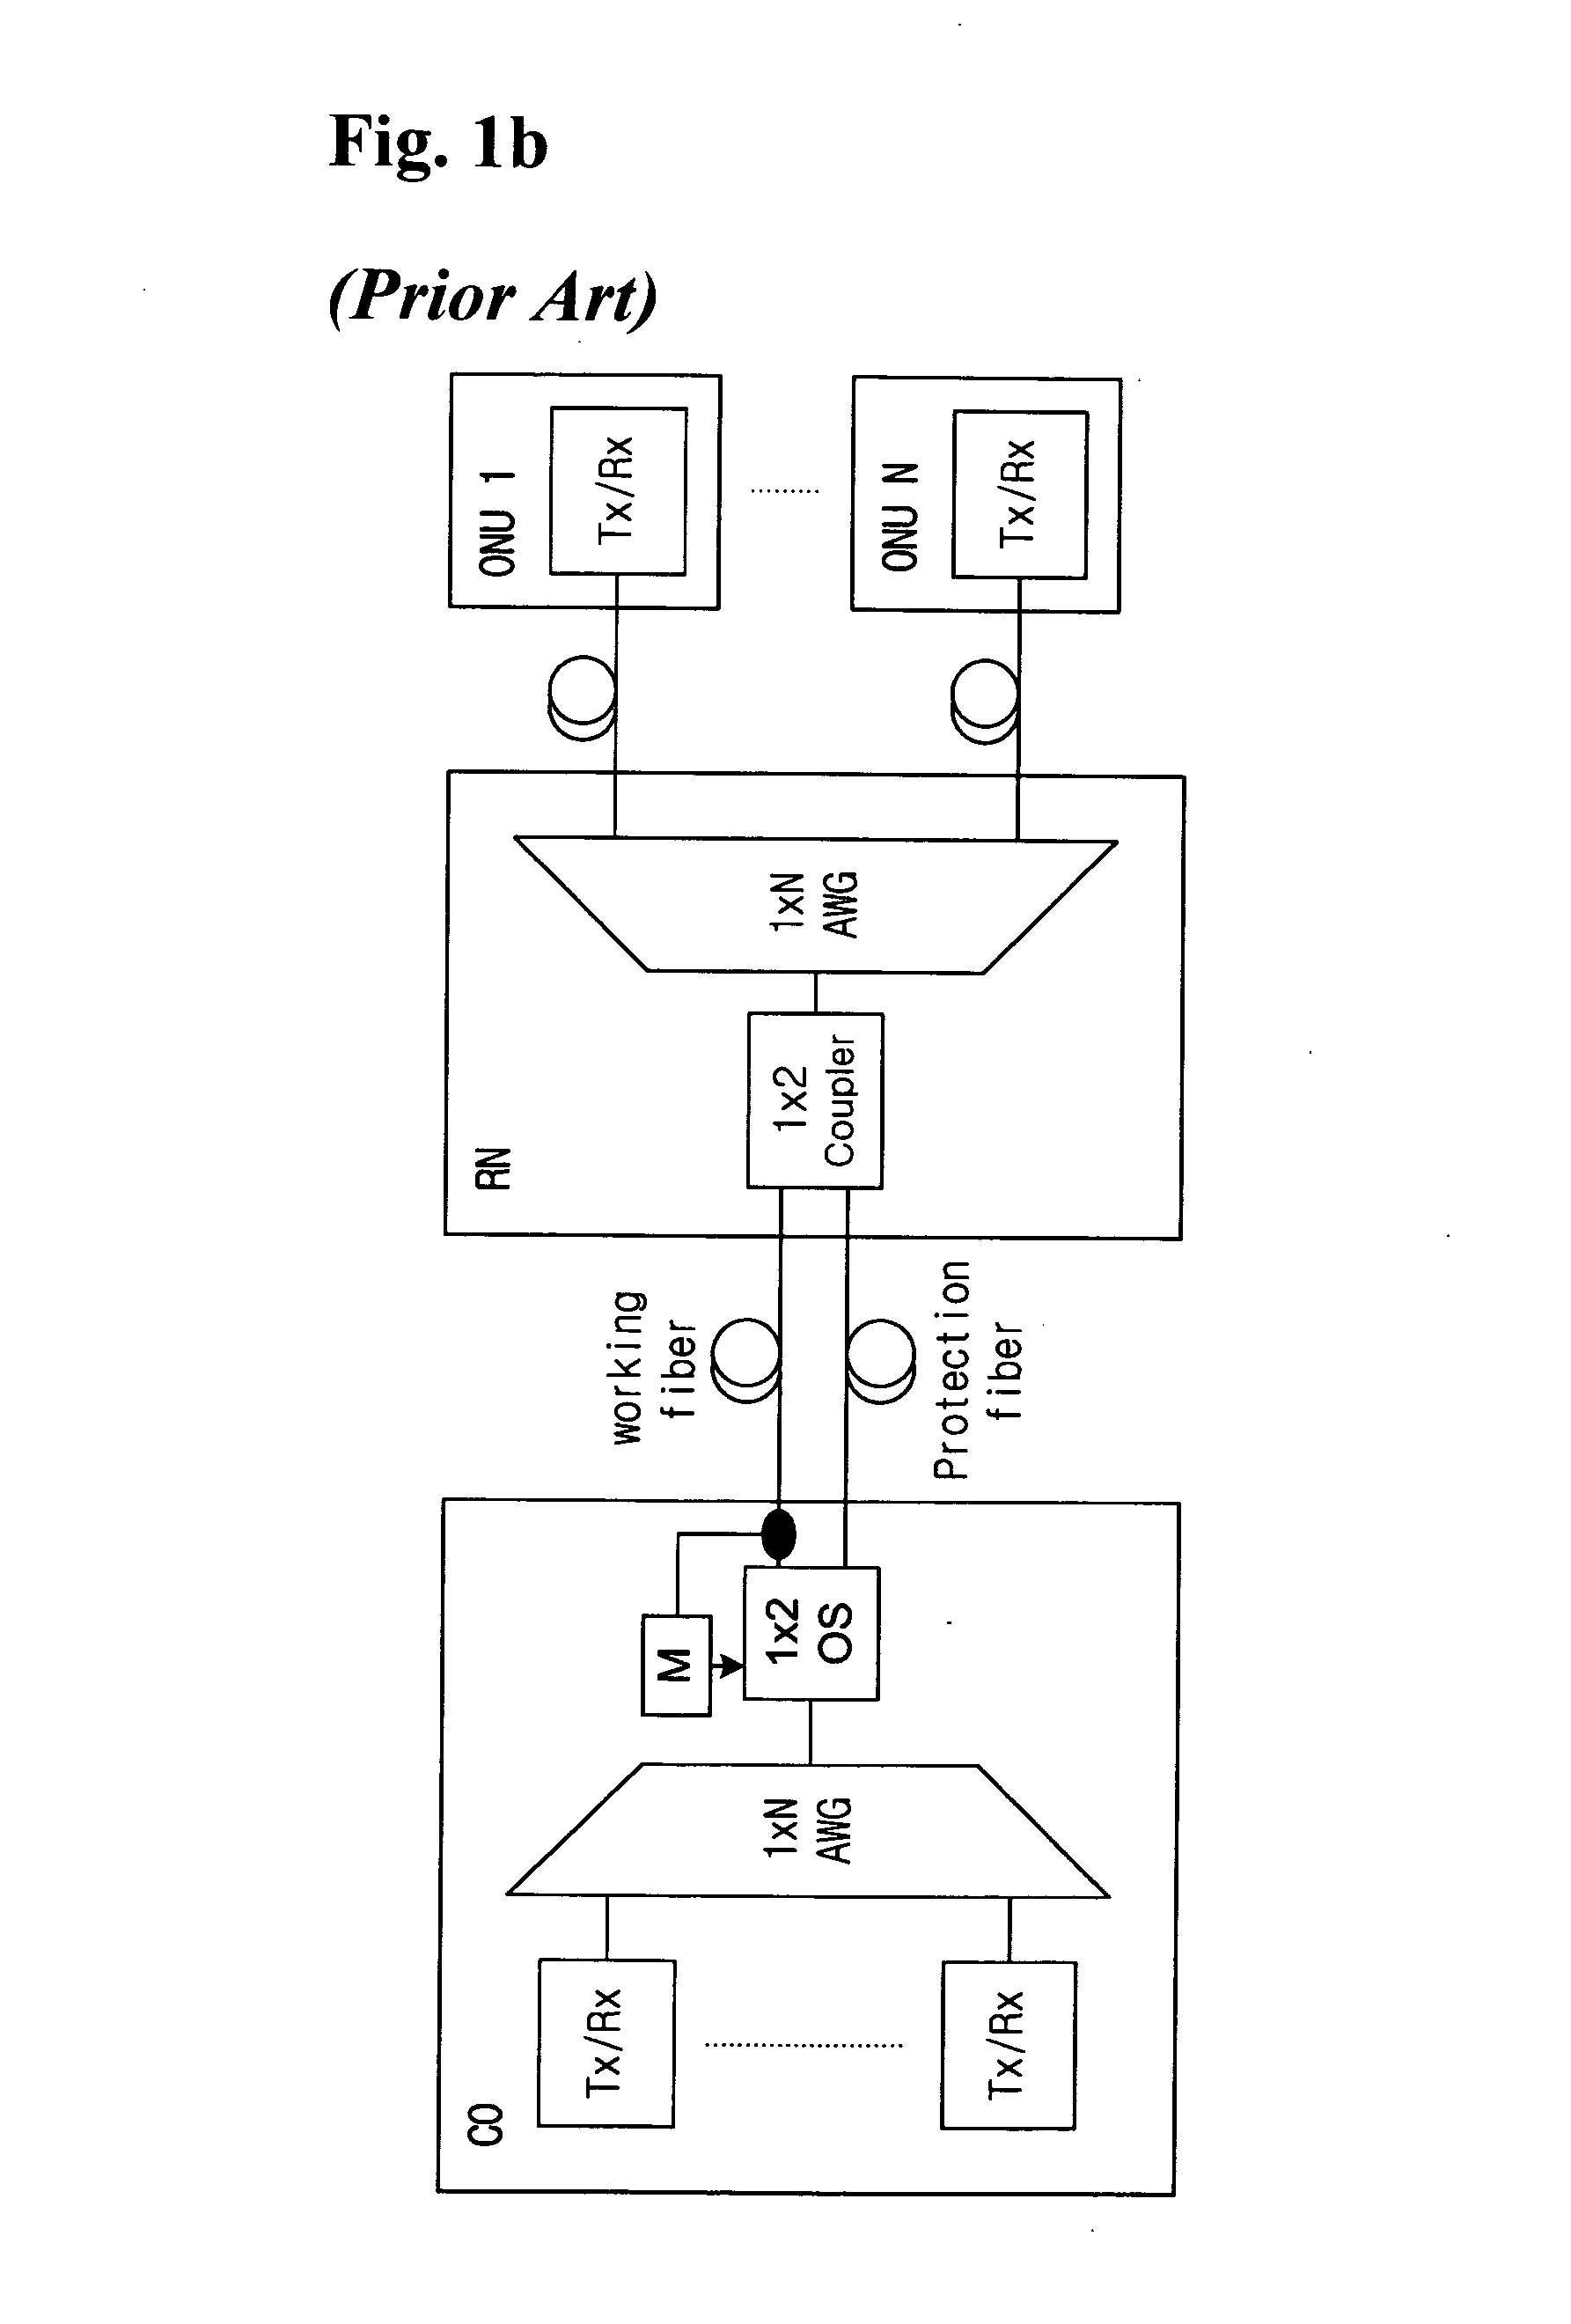 Communication recovering system for wavelength division multiplexed passive optical network